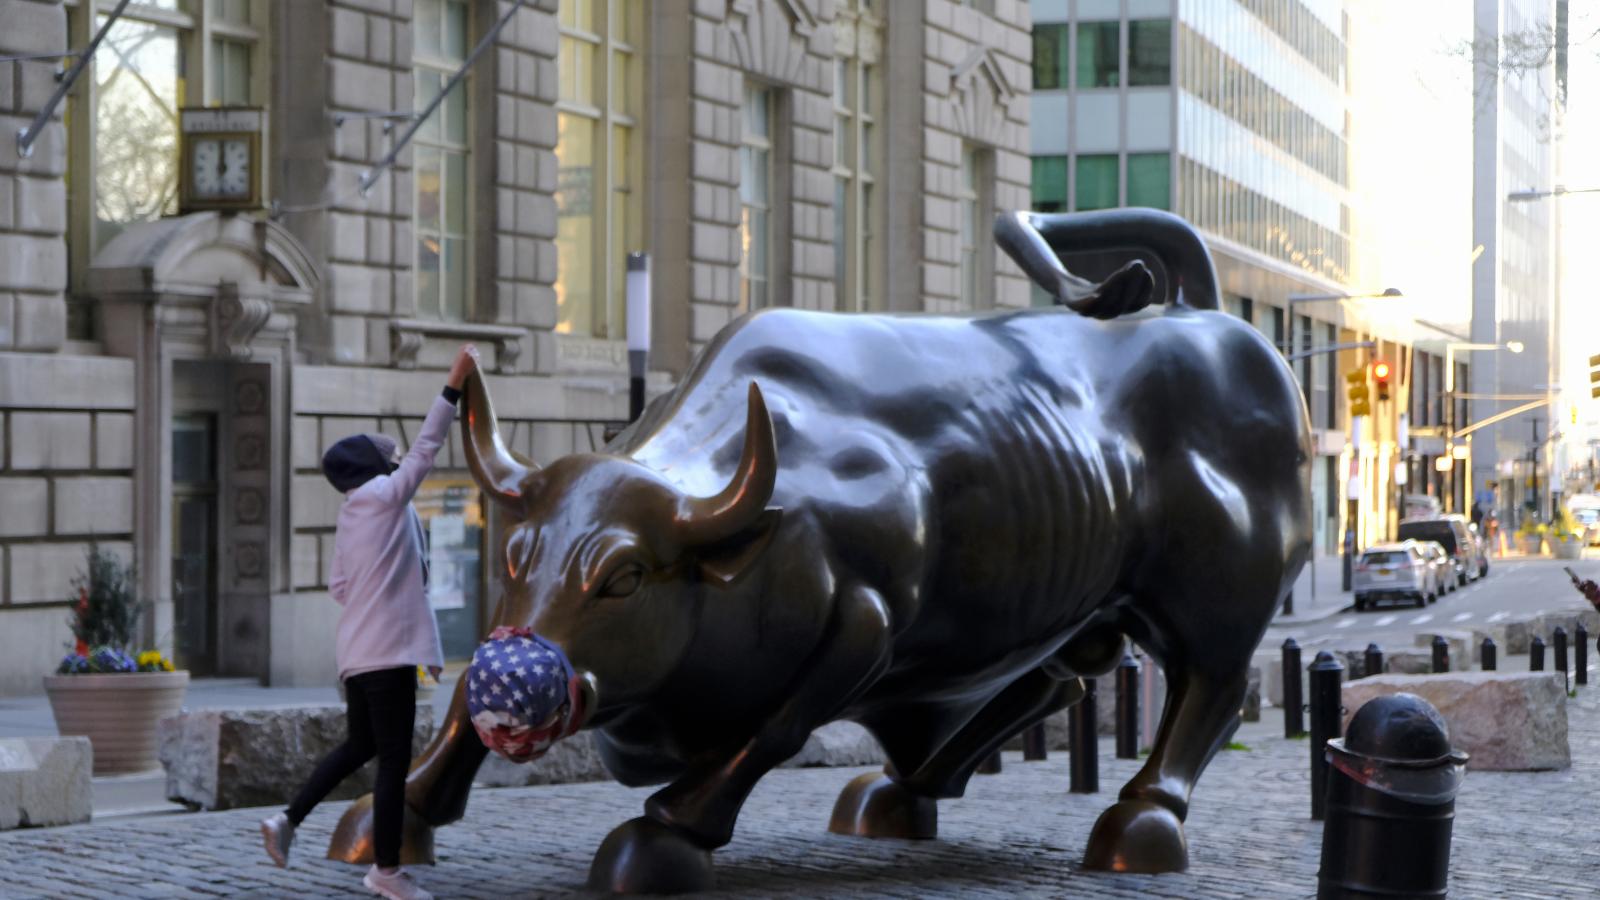 New York - April 22, 2020 -- The Charging Bull on Broadway just north of Bowling Green in the Financial District of Manhattan is seen with a facial mask during the coronavirus pandemic outbreak Wednesday afternoon. (Luiz C. Ribeiro for New York Daily News)